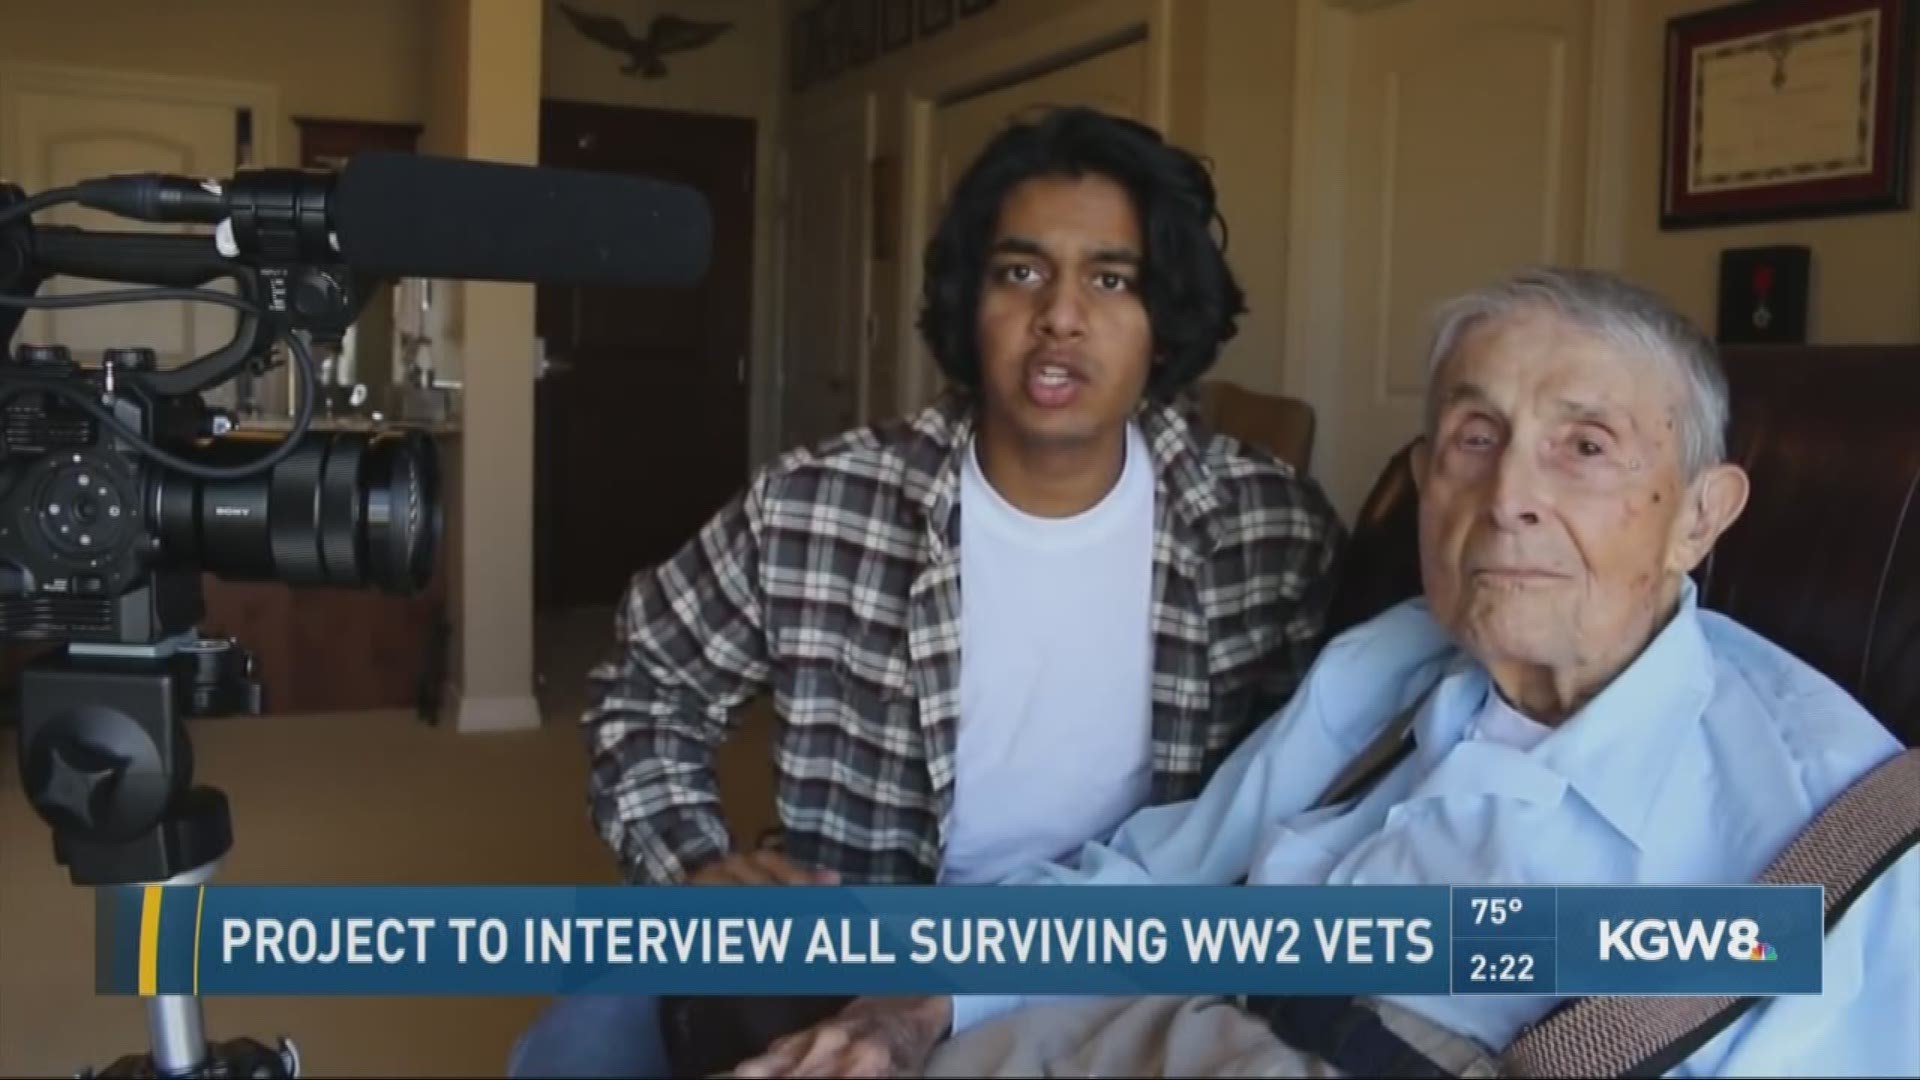 Project aims to interview all surviving WW2 Vets